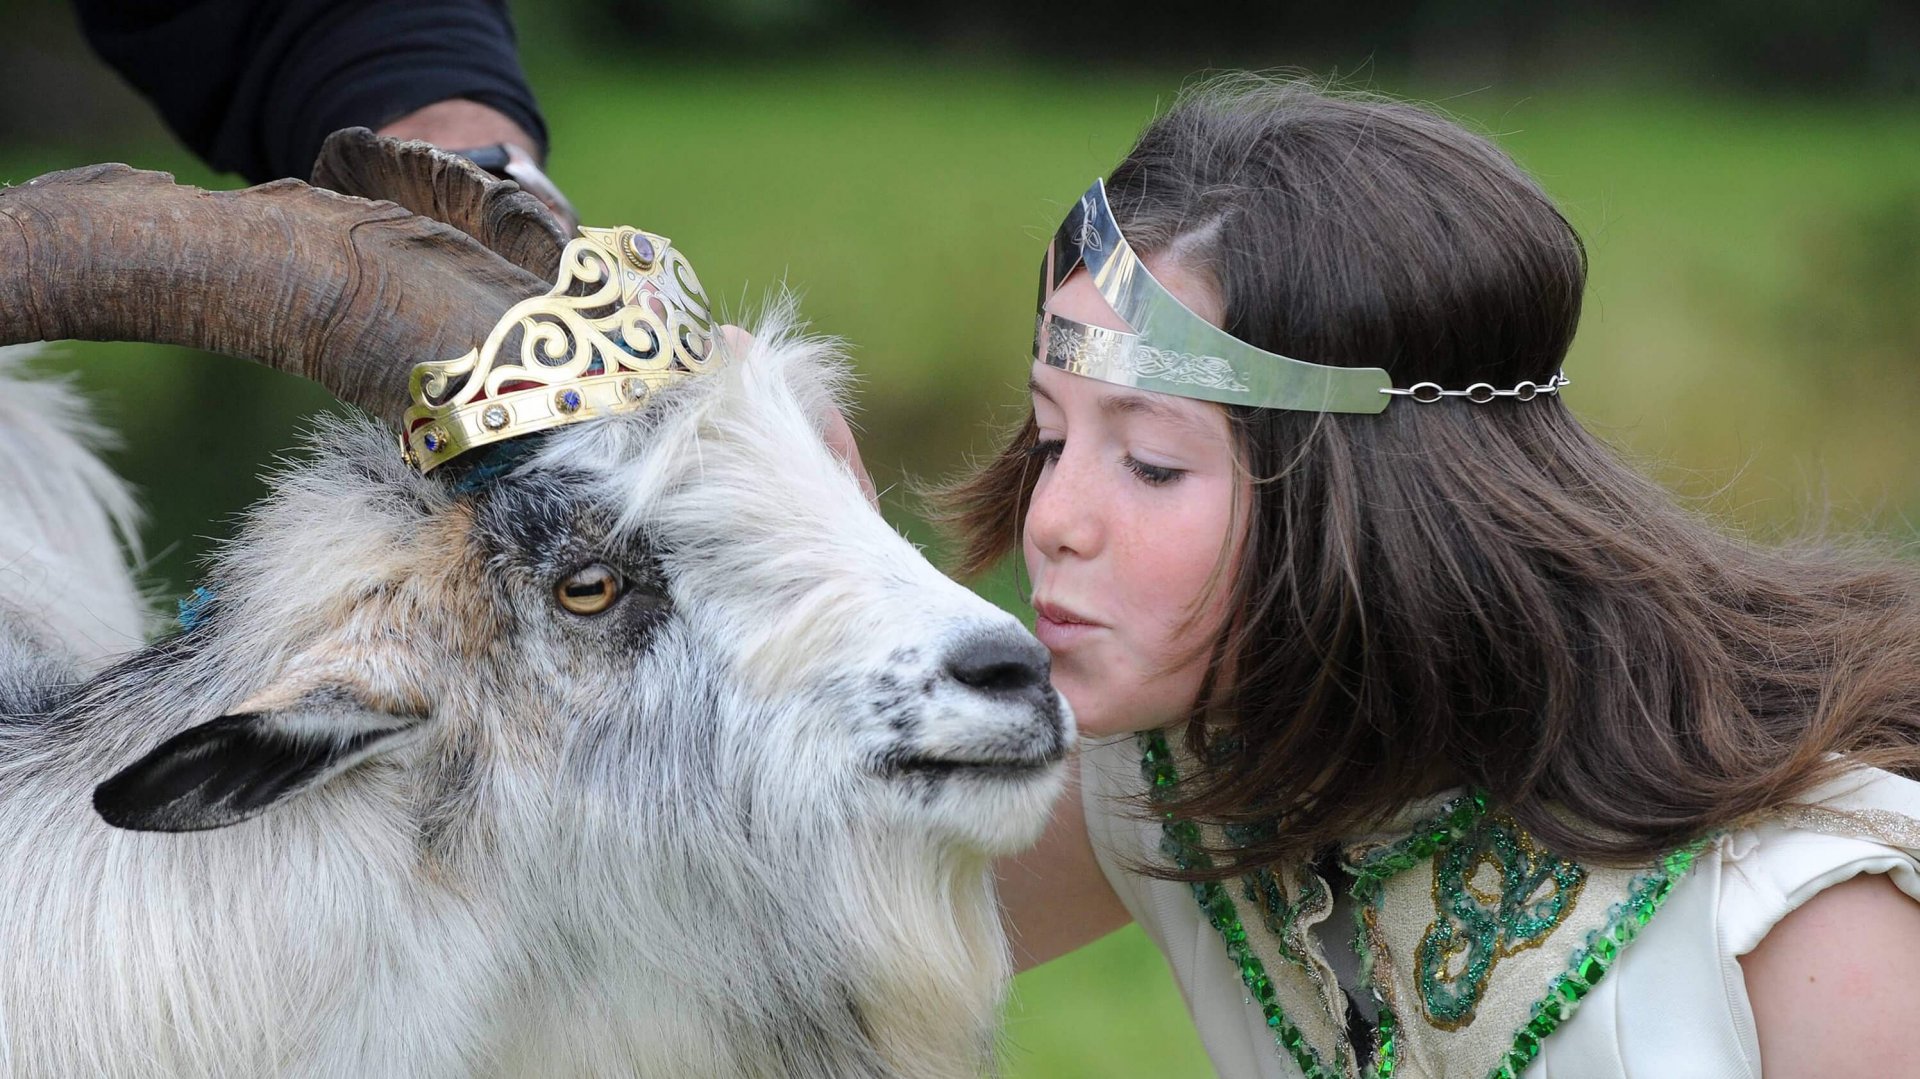 A young girl weating a tiara kissing a goat wearing a crown. Nothing weird about this.